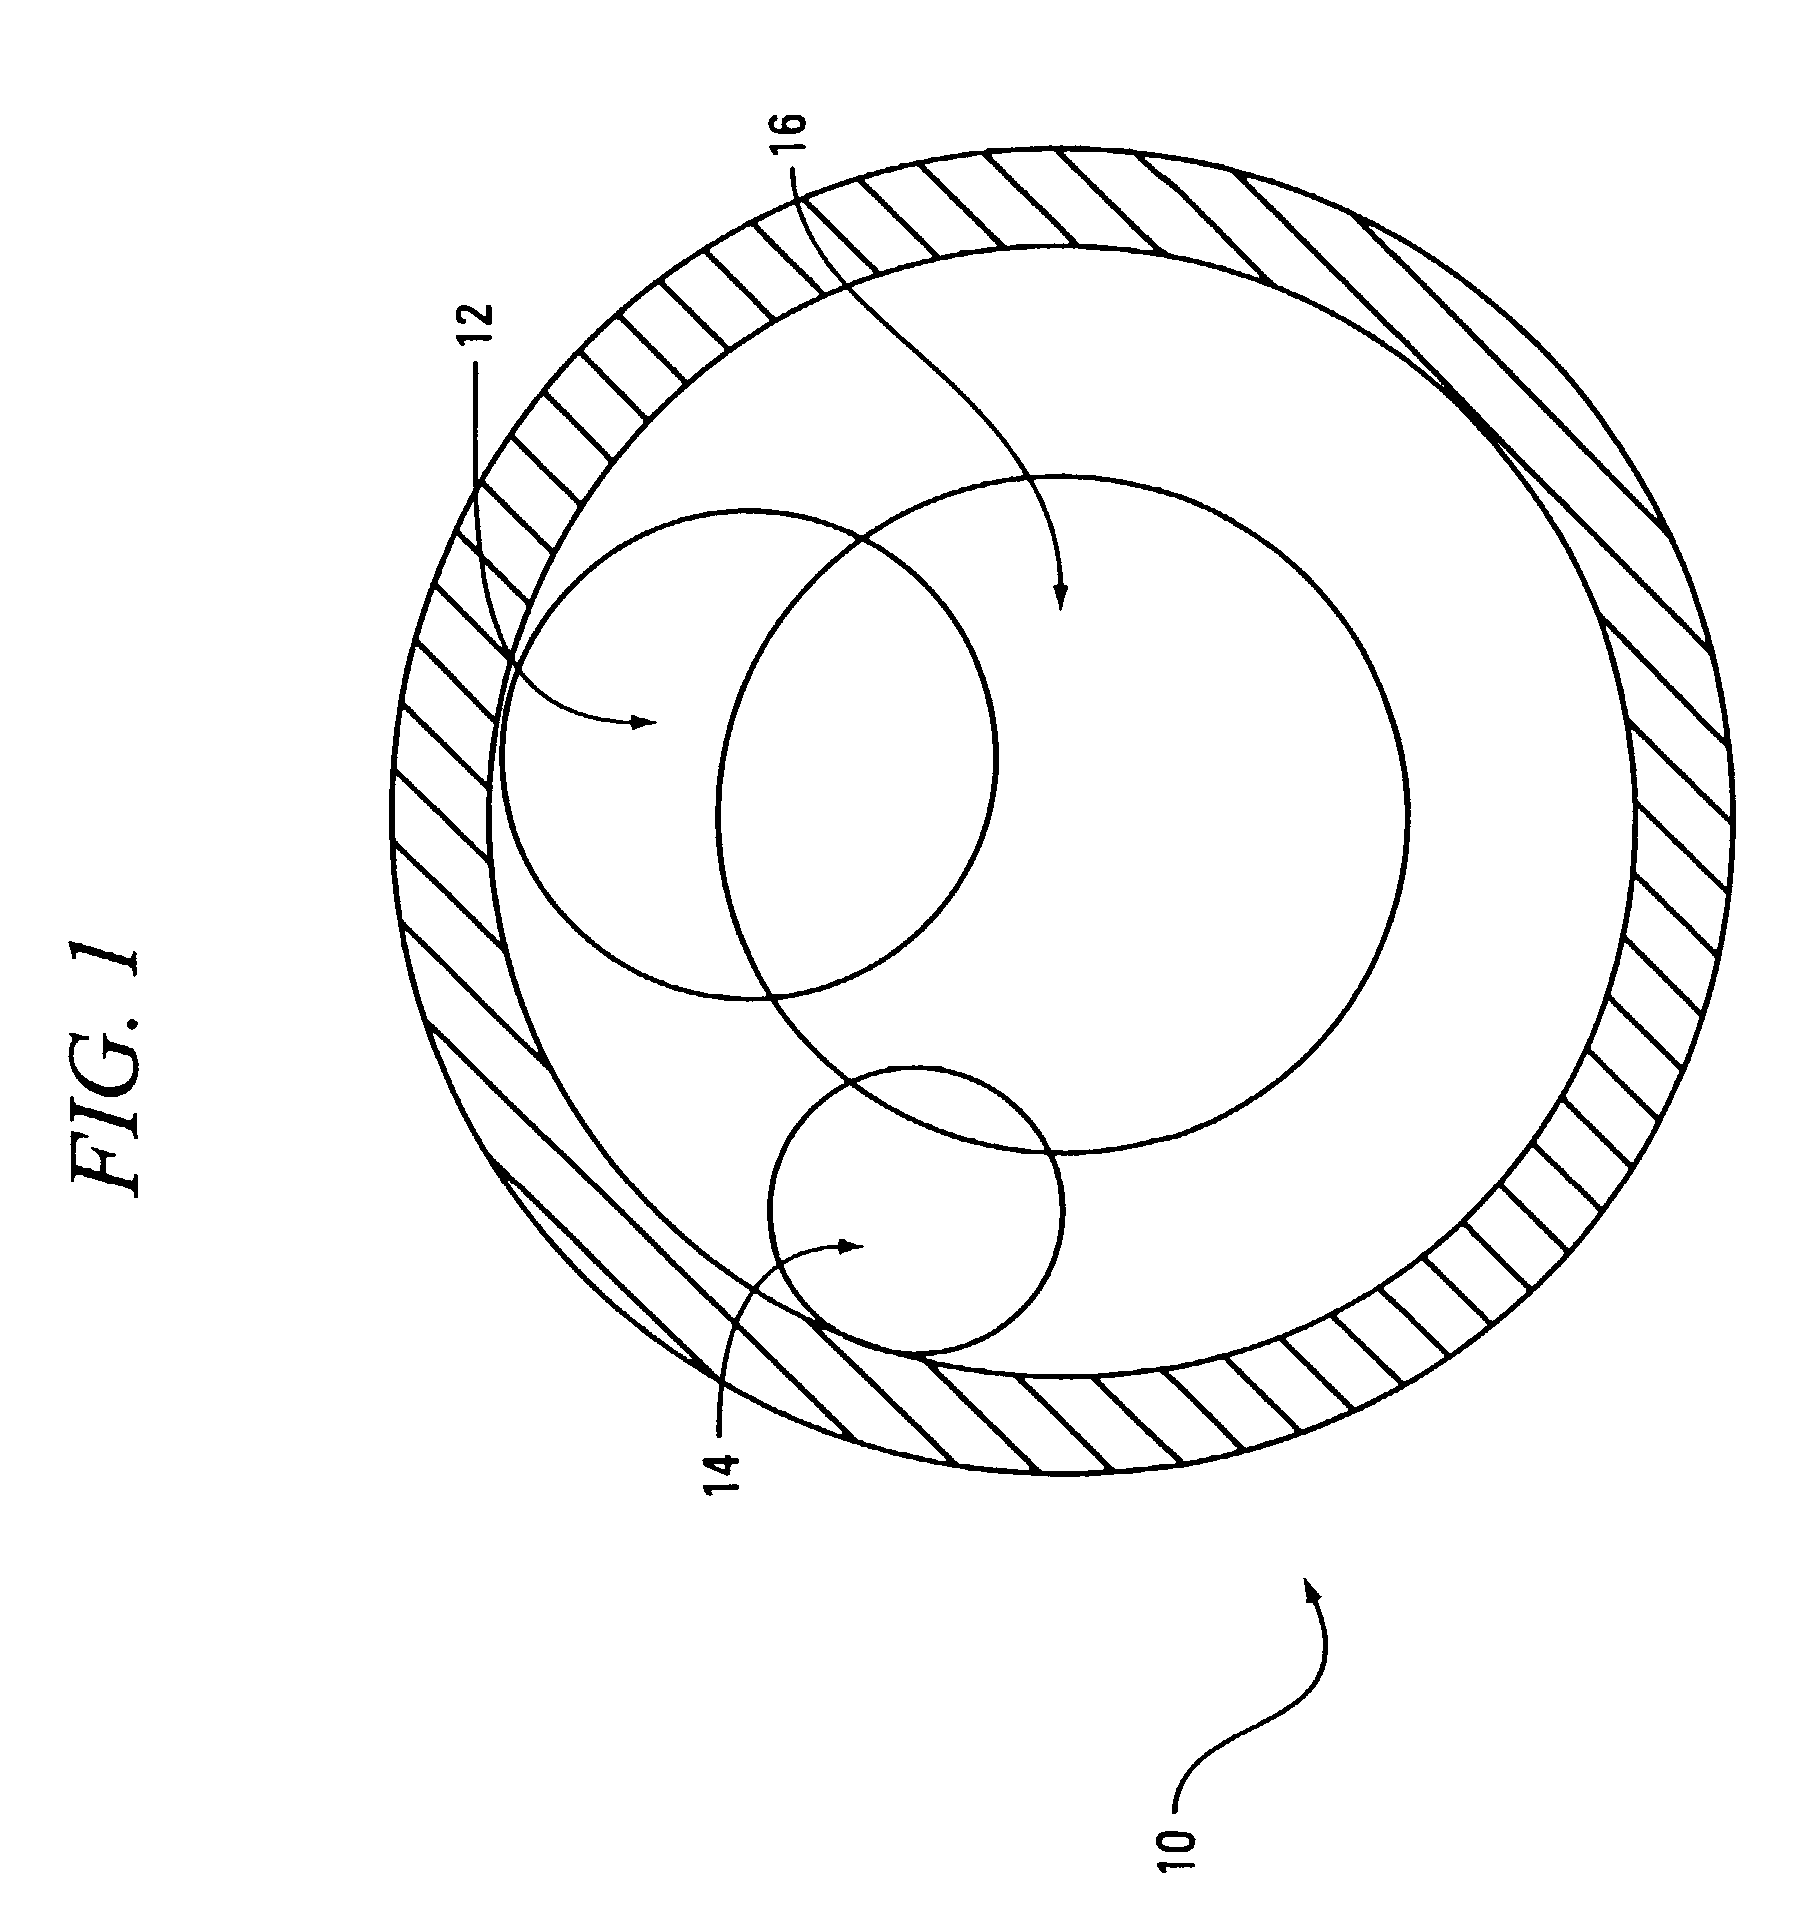 Angioplasty device and method of making same